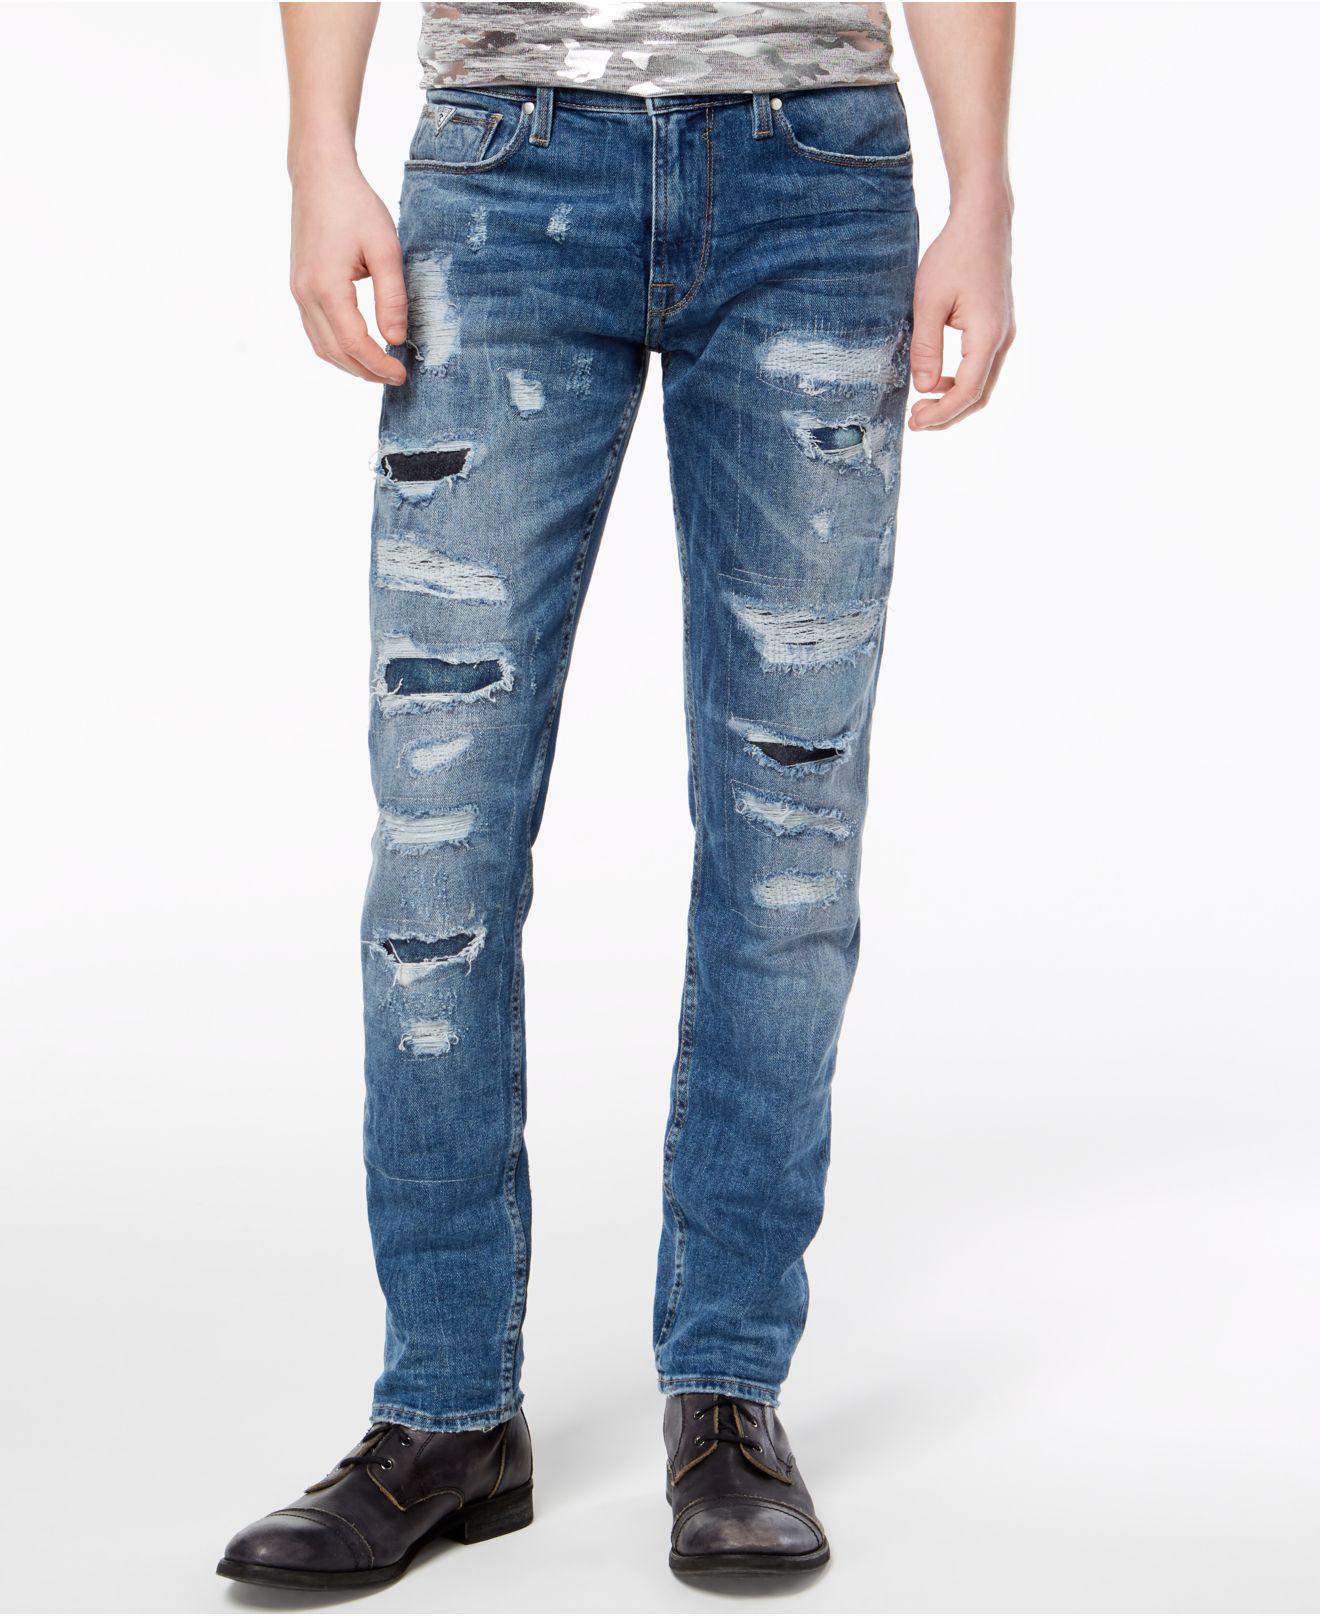 Guess Denim Slim Tapered Fit Stretch Jeans in Blue for Men - Lyst